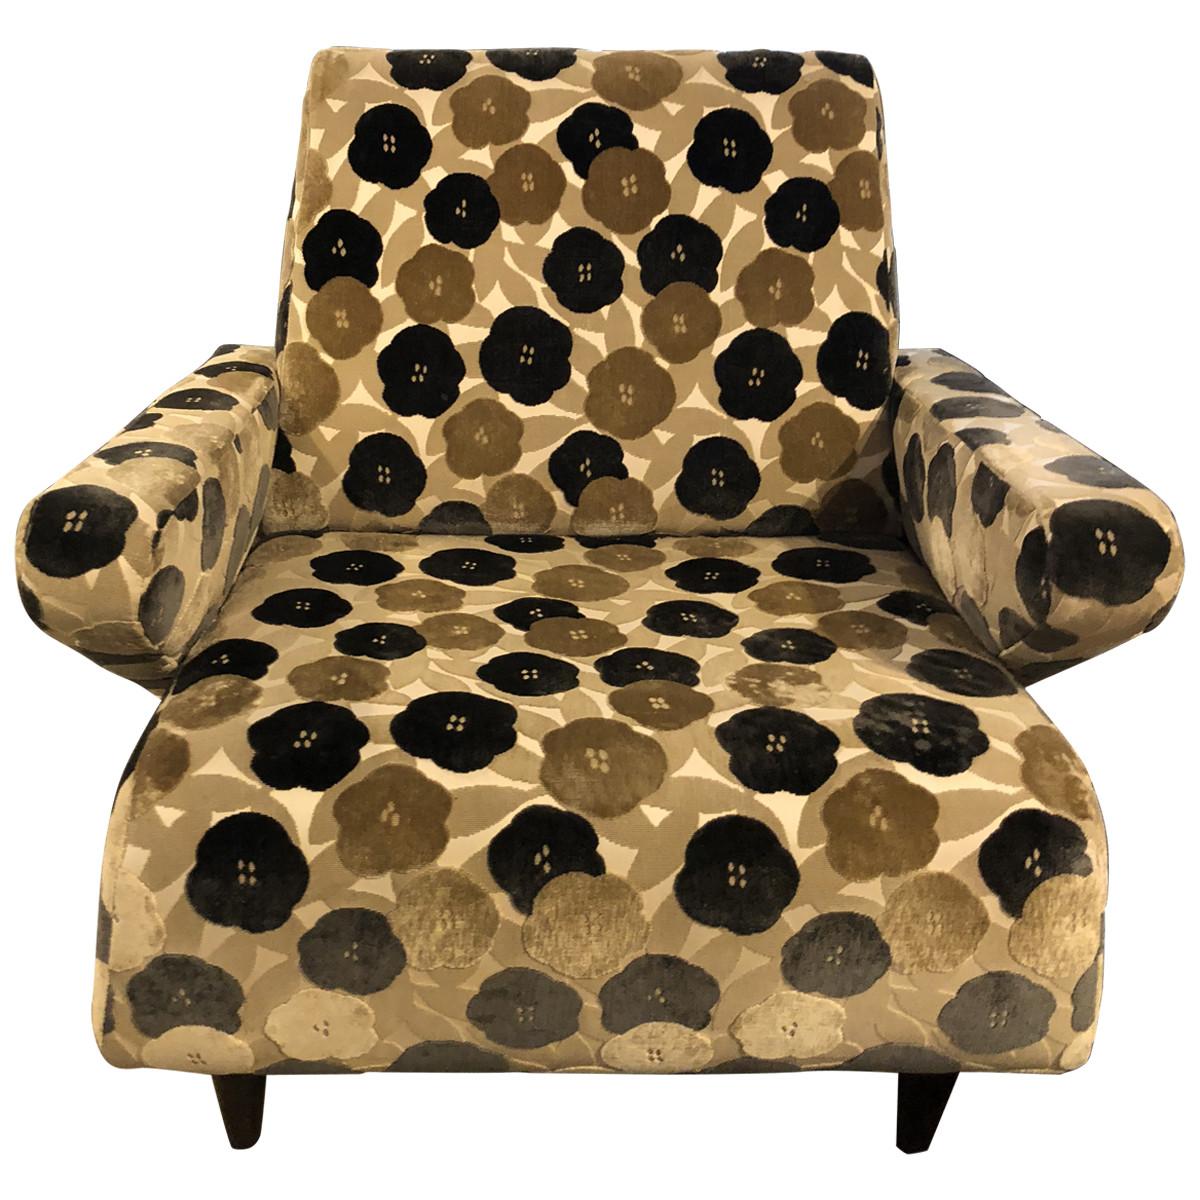 This vintage, Italian retro floral lounge chair smartly combines functionality, comfort, and style all into one neat package. With a wide tight back and seat, this lounge chair is upholstered in black, ivory, and beige cut-velvet in a decorative